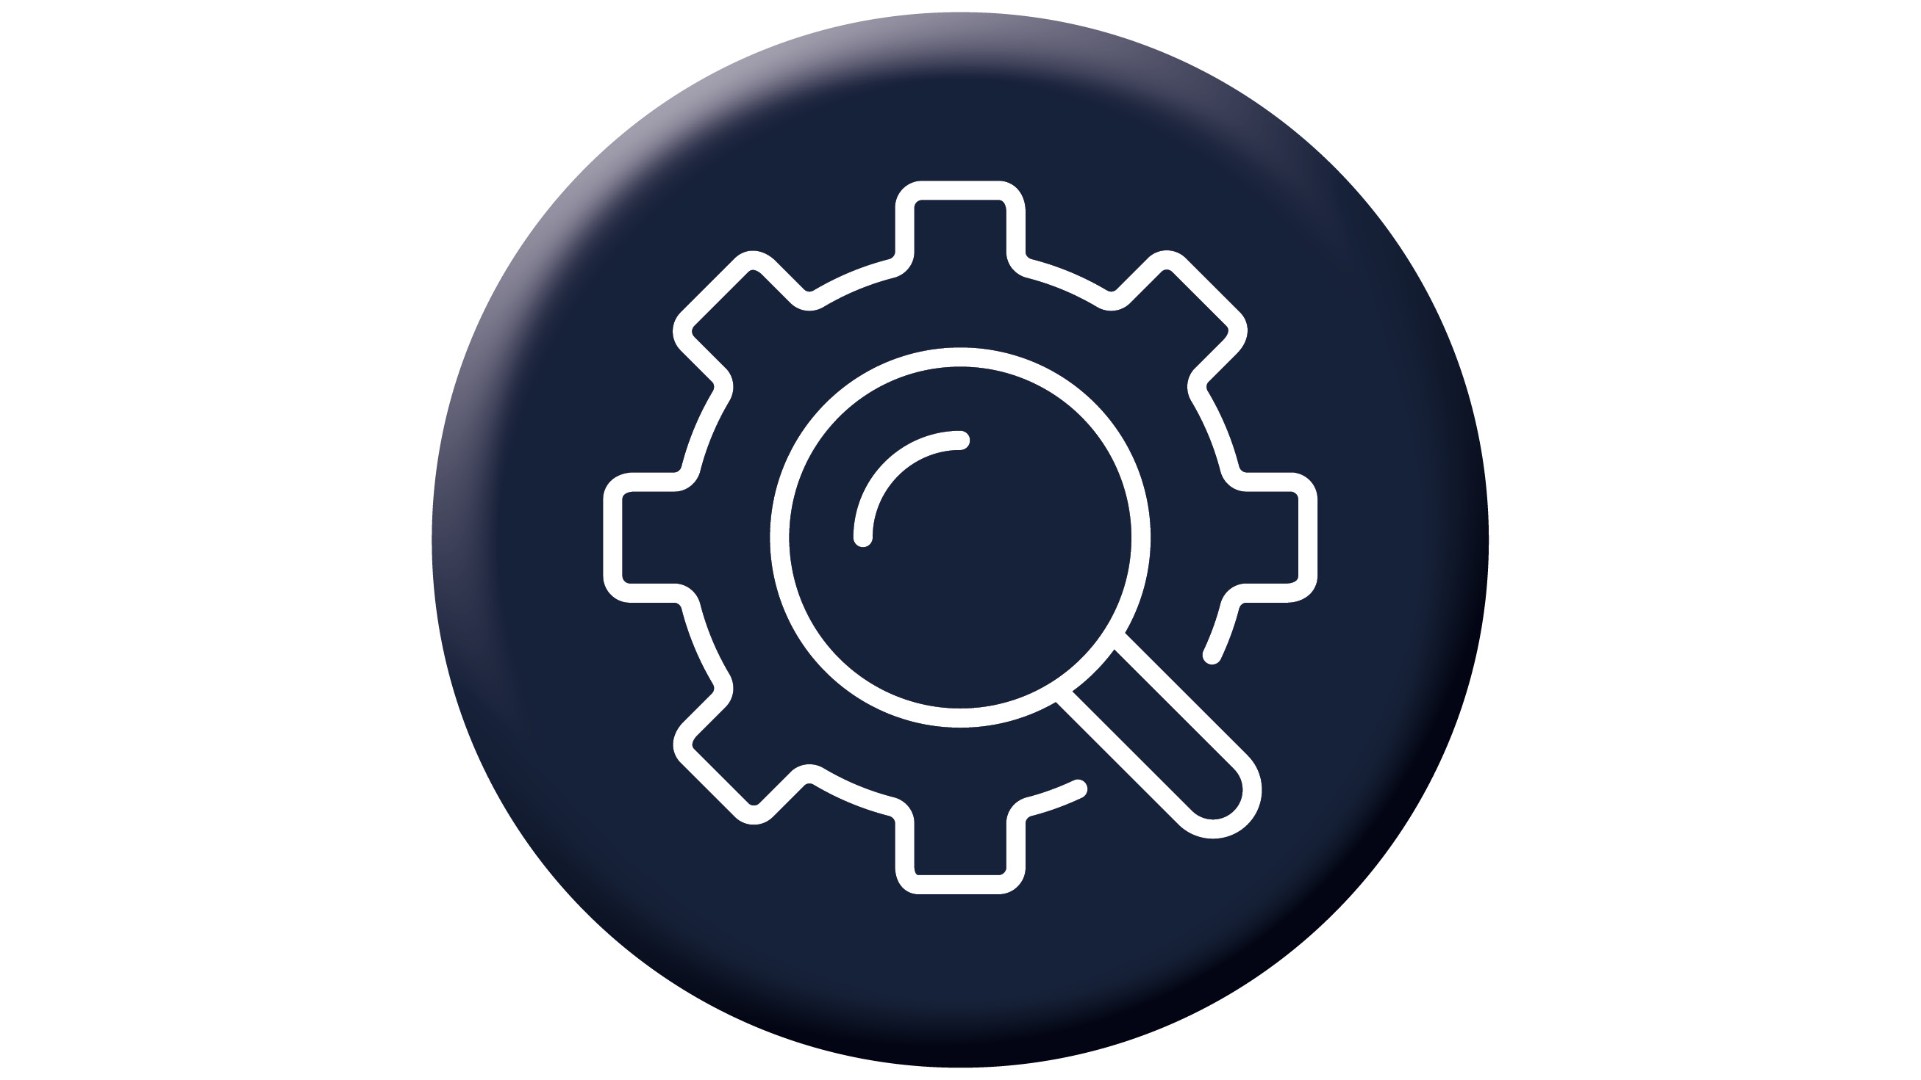 Icon with cogwheel and magnifying glass represents the Invoice Management process analysis 